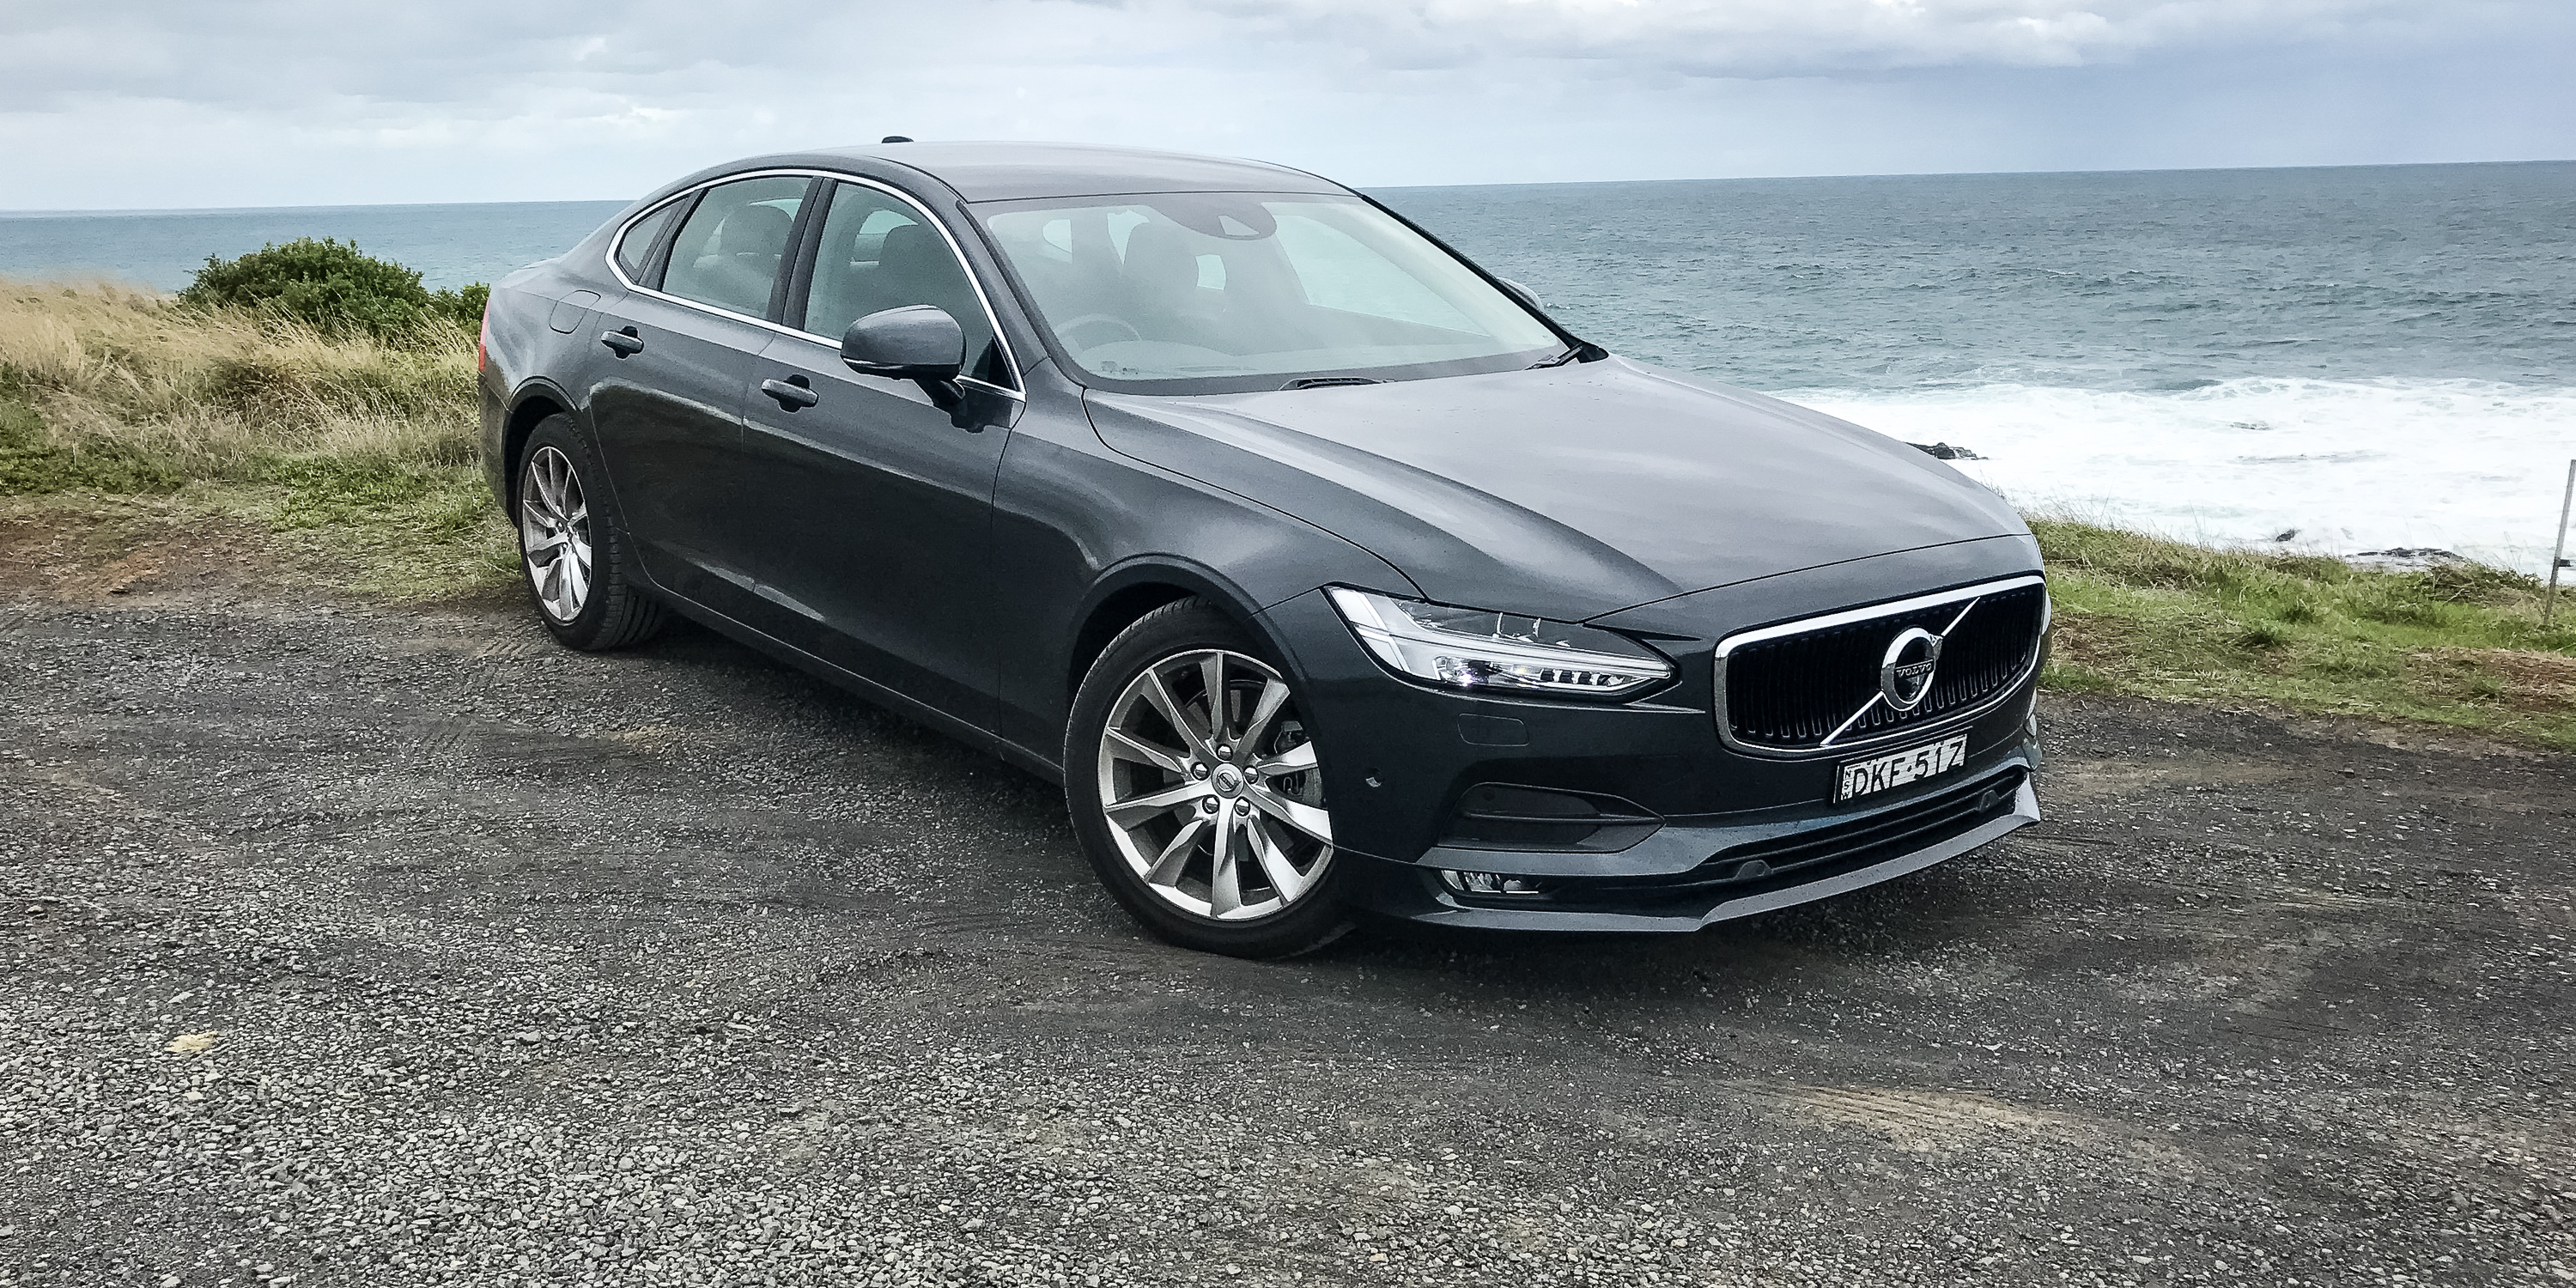 2017 Volvo S90 D4 review: Long-term report two - highway ...
